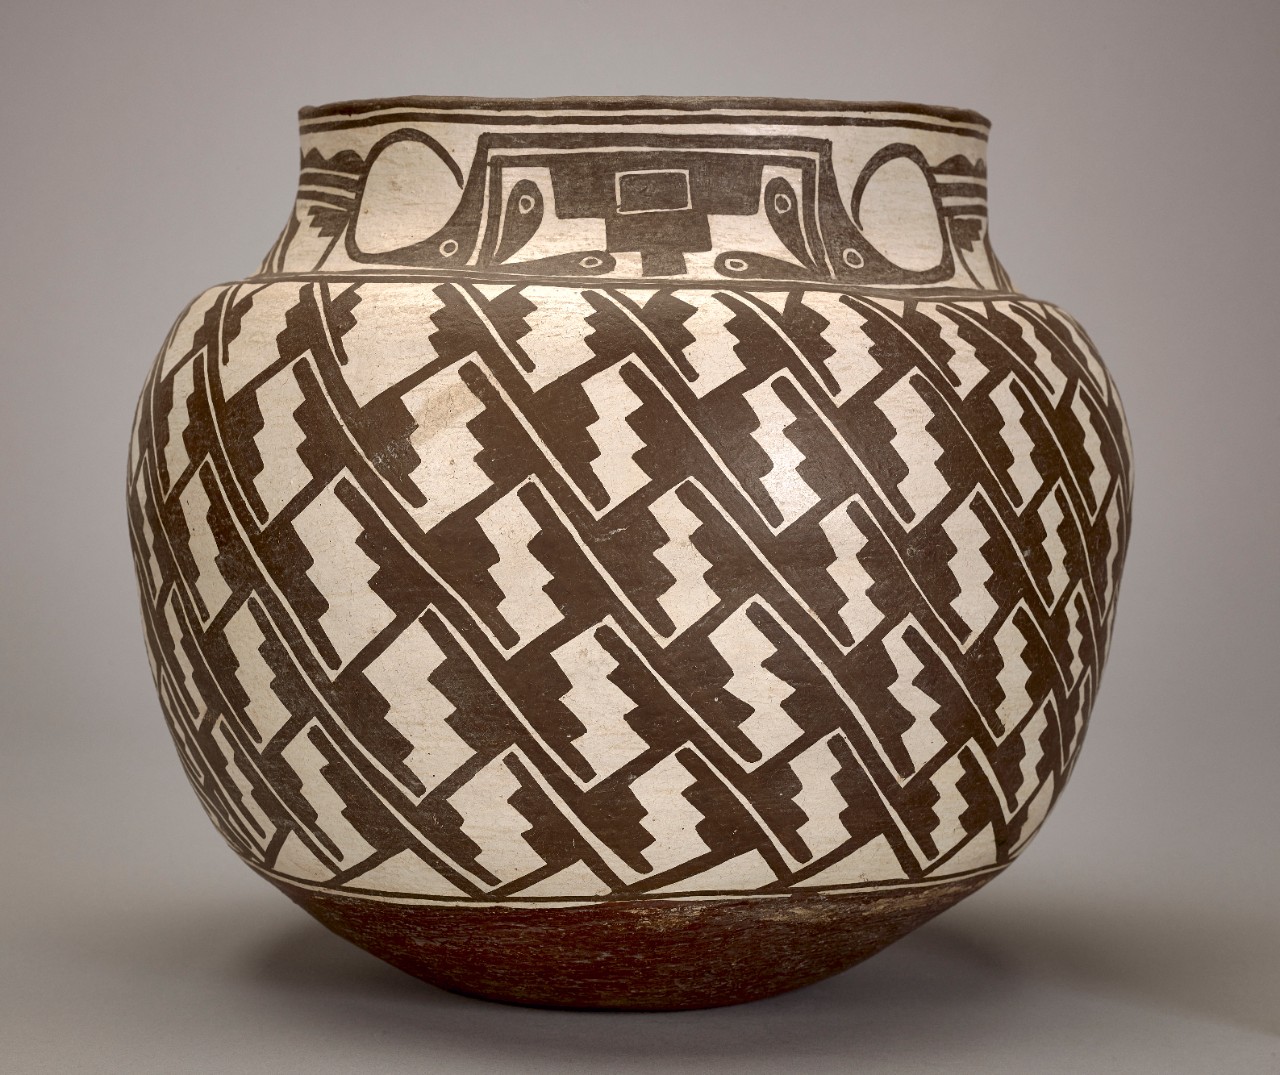 Unidentified Zuñi artist, Pot with black feather motifs on neck and shoulder, ca. 1900, clay with pigment